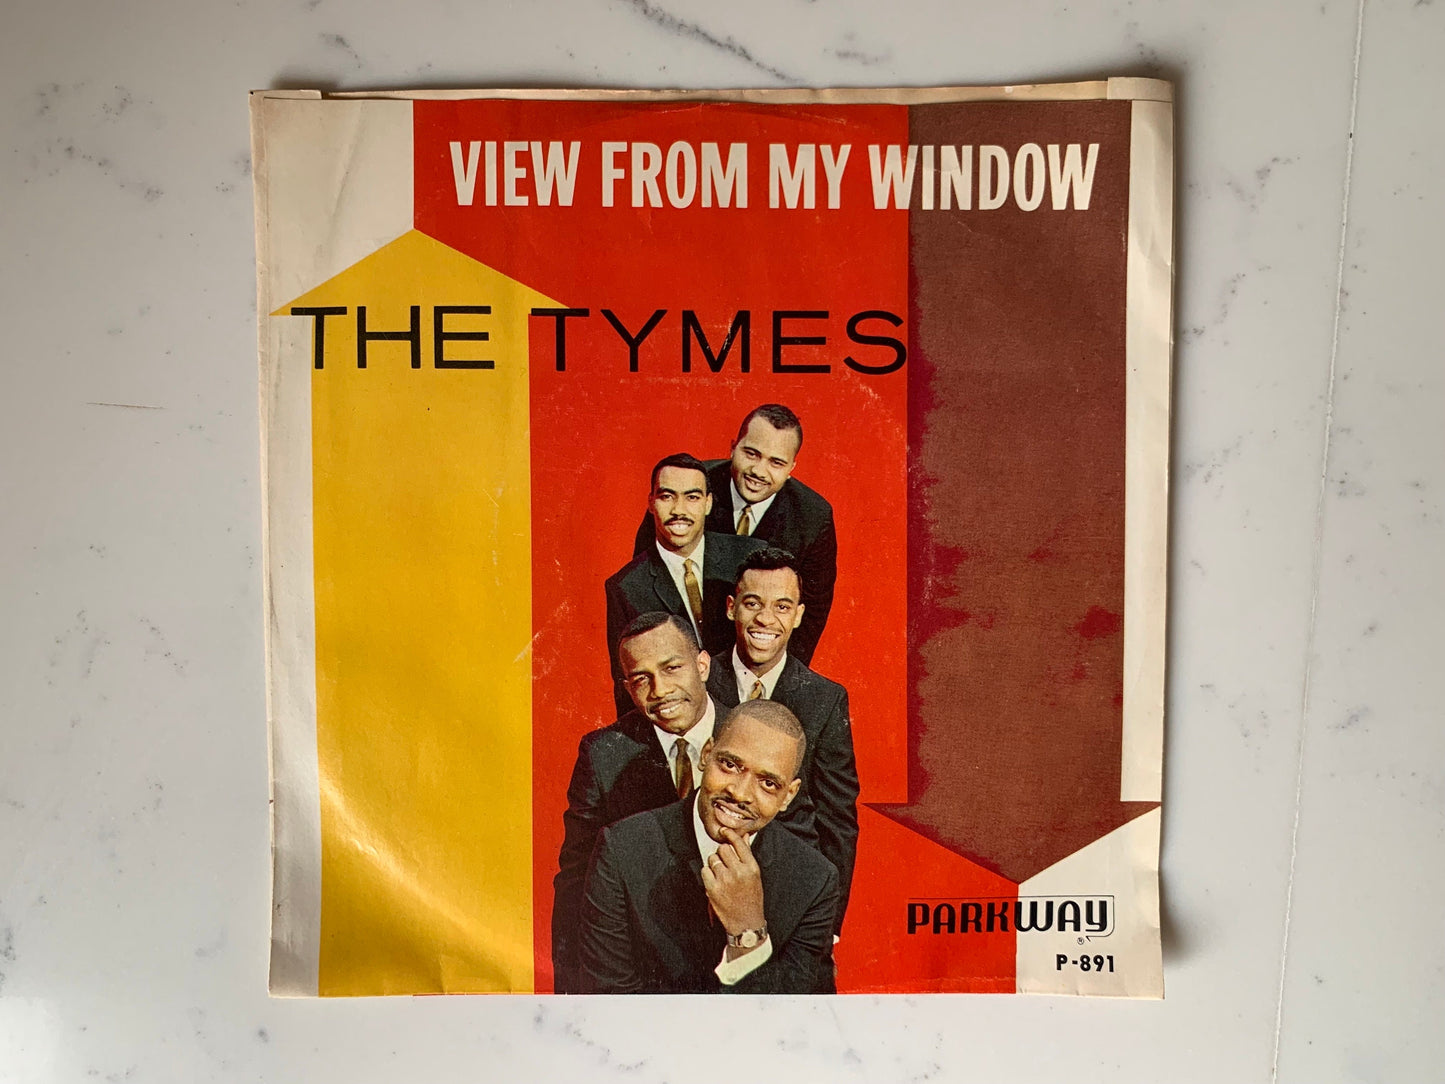 The Tymes View From My Mind, Somewhere, Parkway P-891 1960's Funk/Soul Records 45 rpm